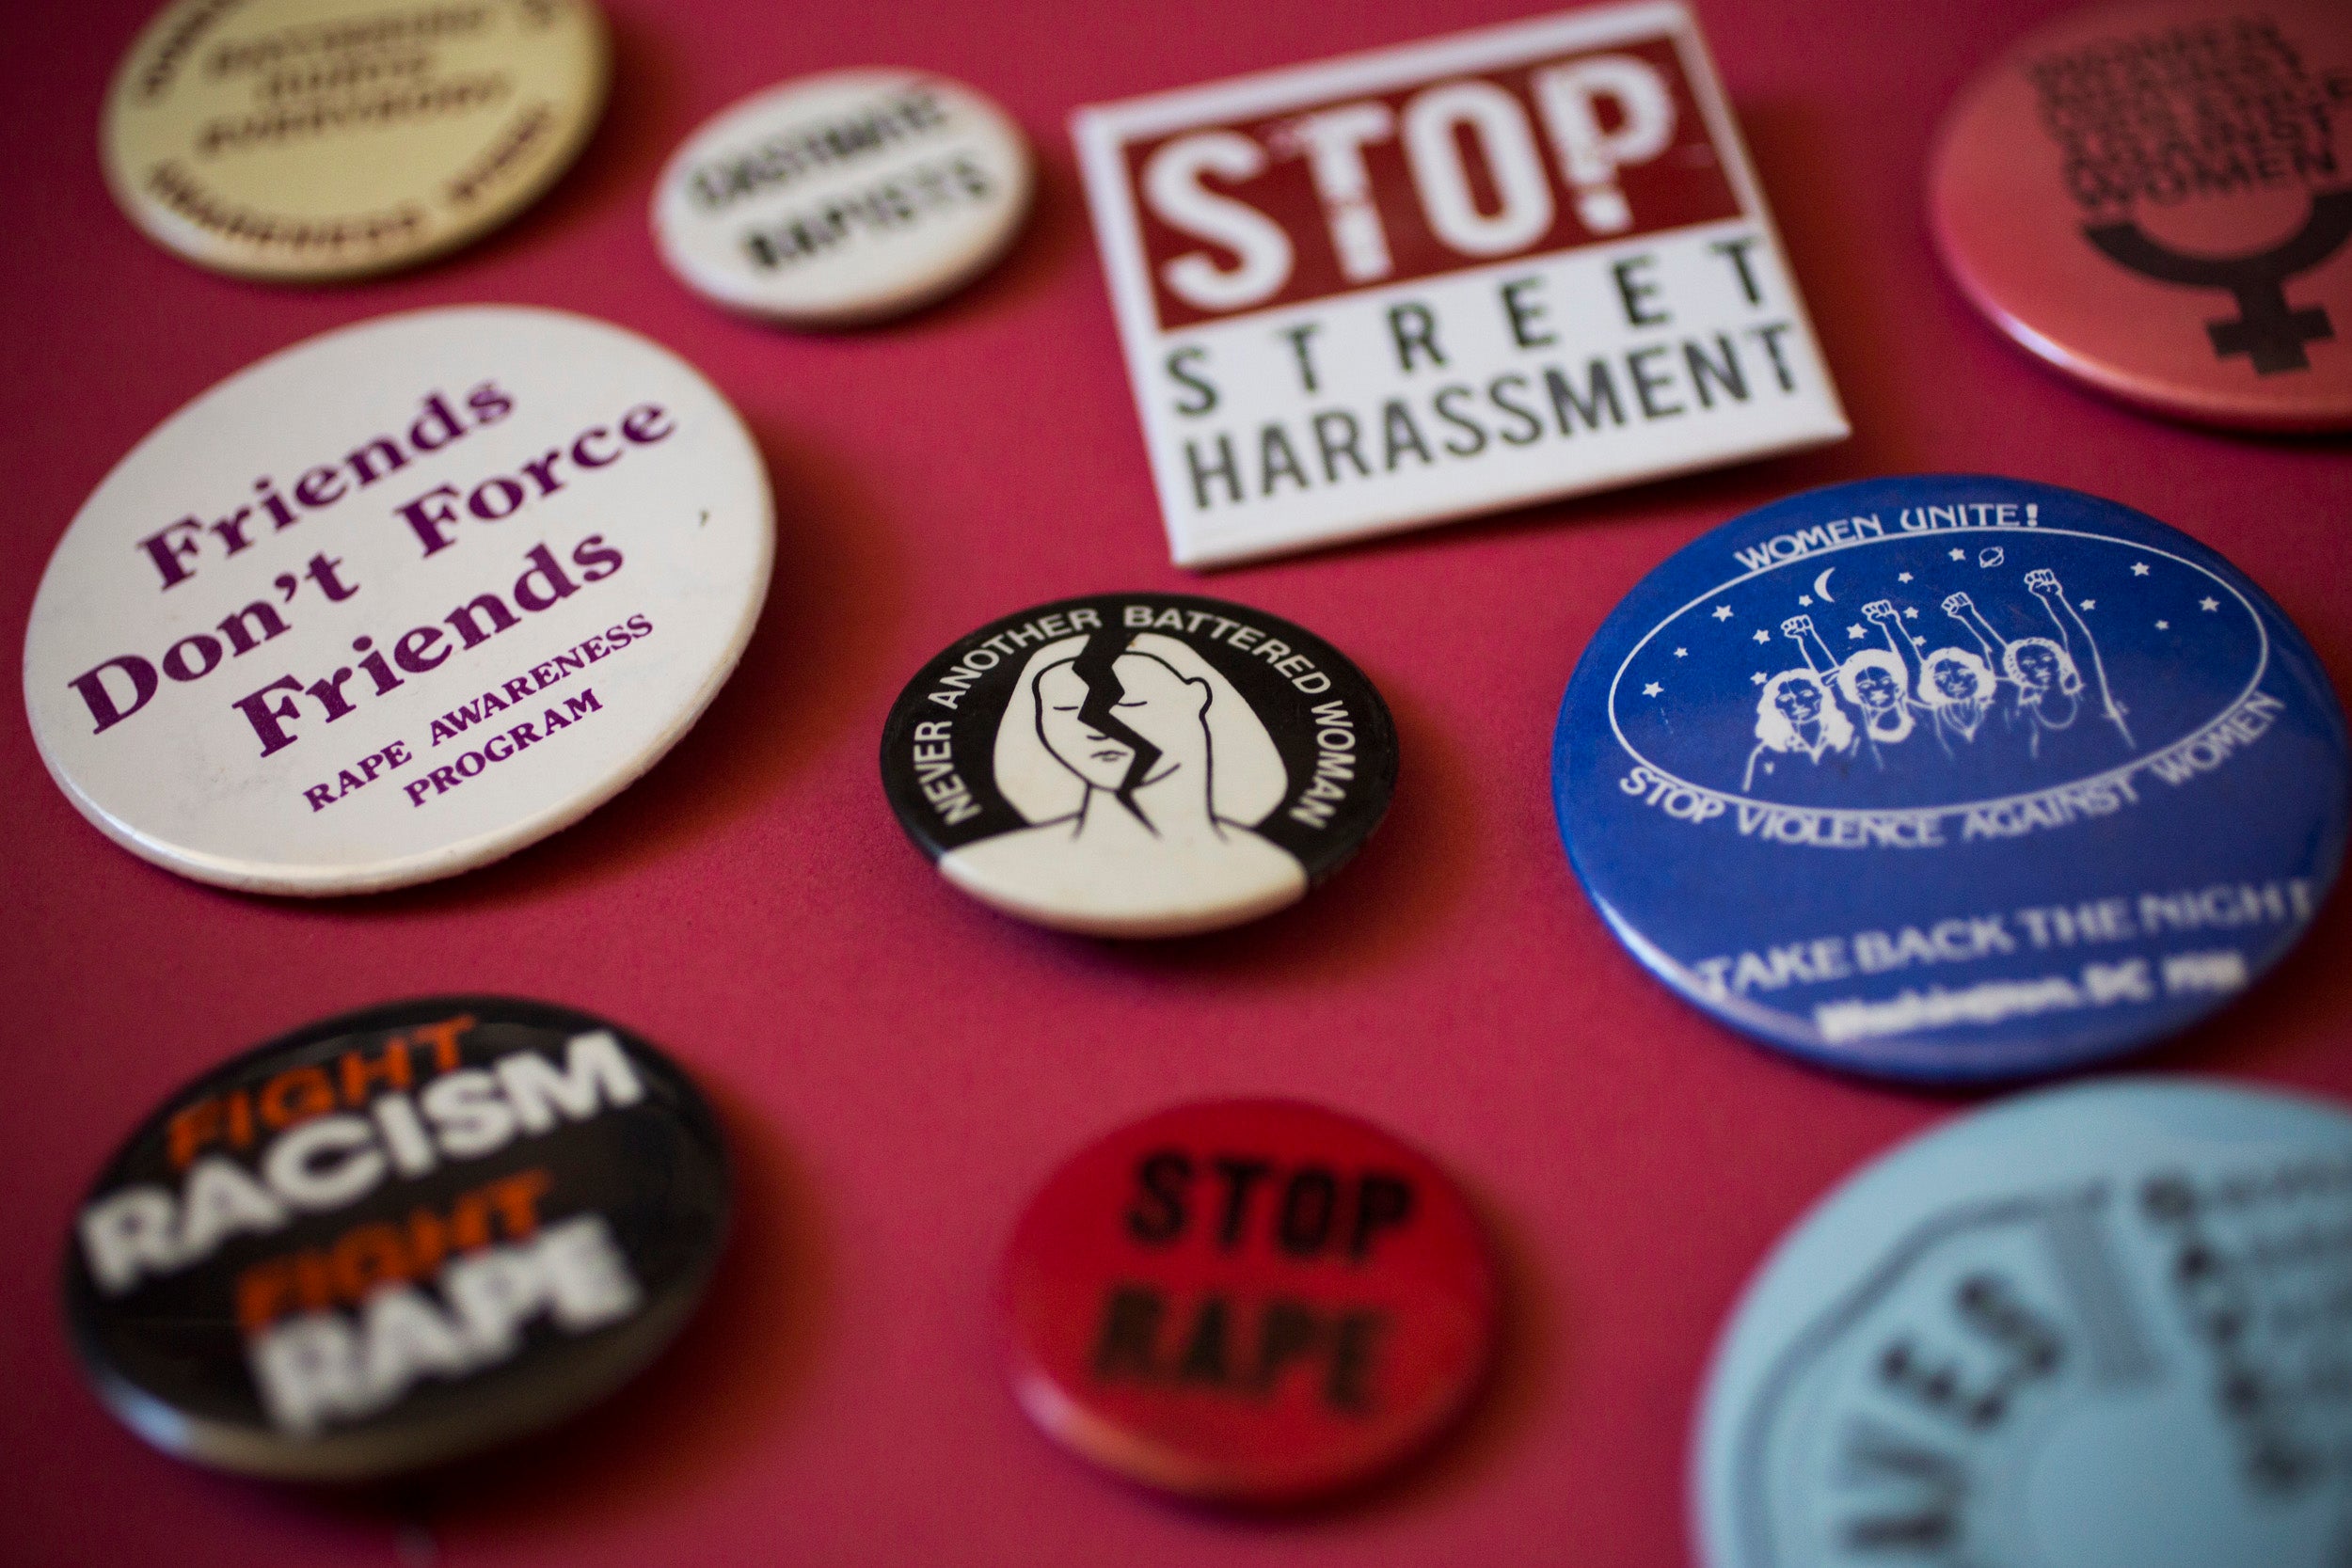 Stop Violence Against Women buttons.